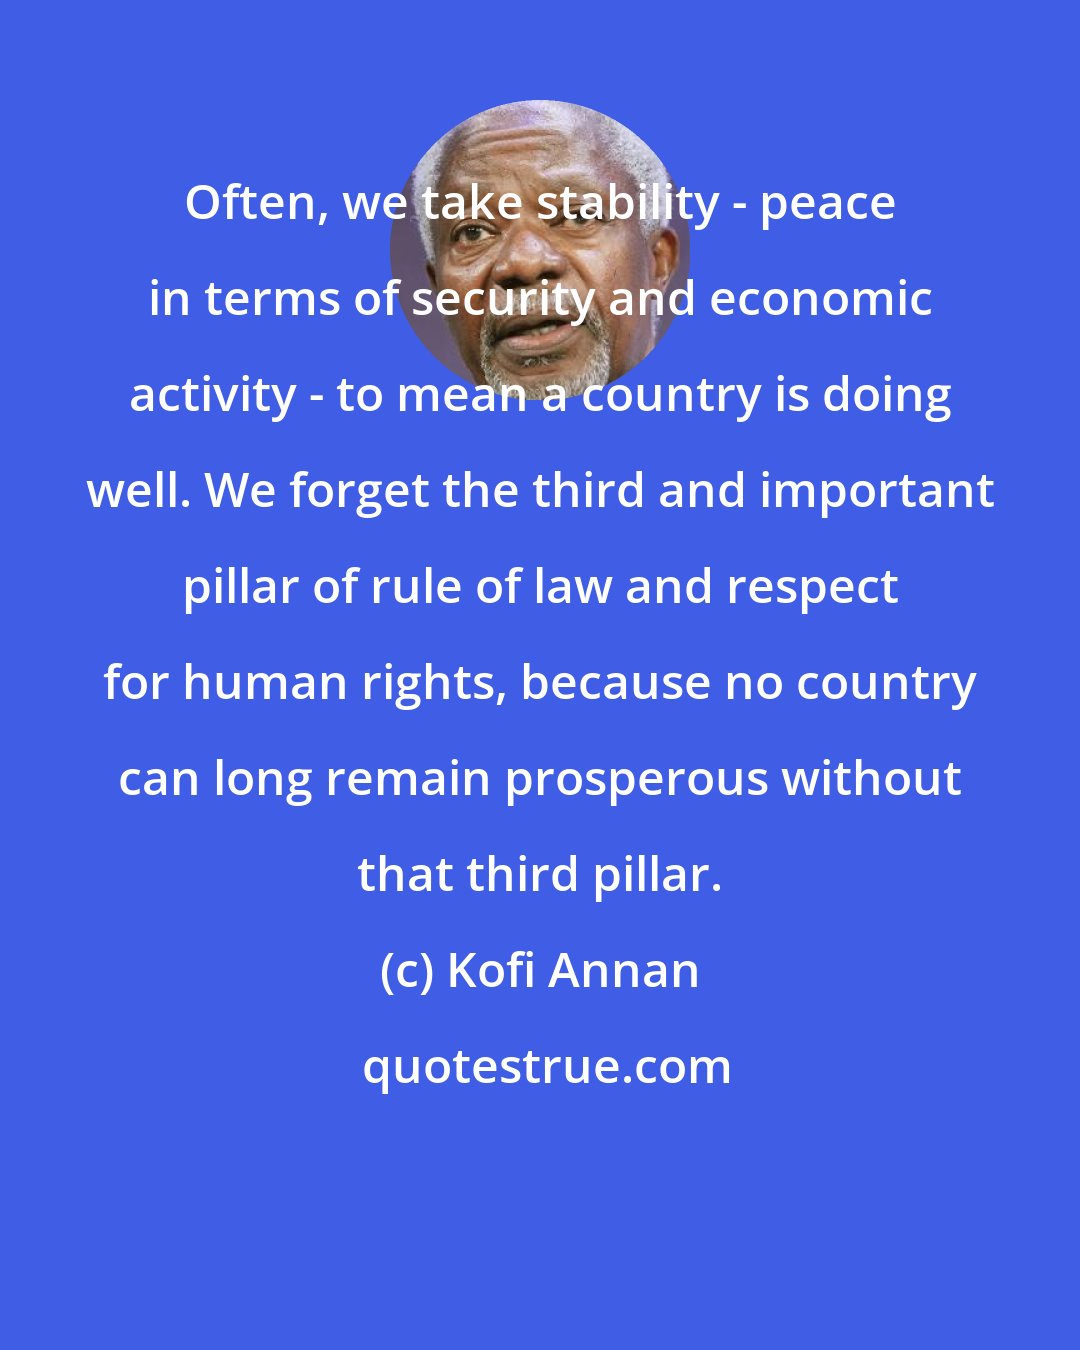 Kofi Annan: Often, we take stability - peace in terms of security and economic activity - to mean a country is doing well. We forget the third and important pillar of rule of law and respect for human rights, because no country can long remain prosperous without that third pillar.